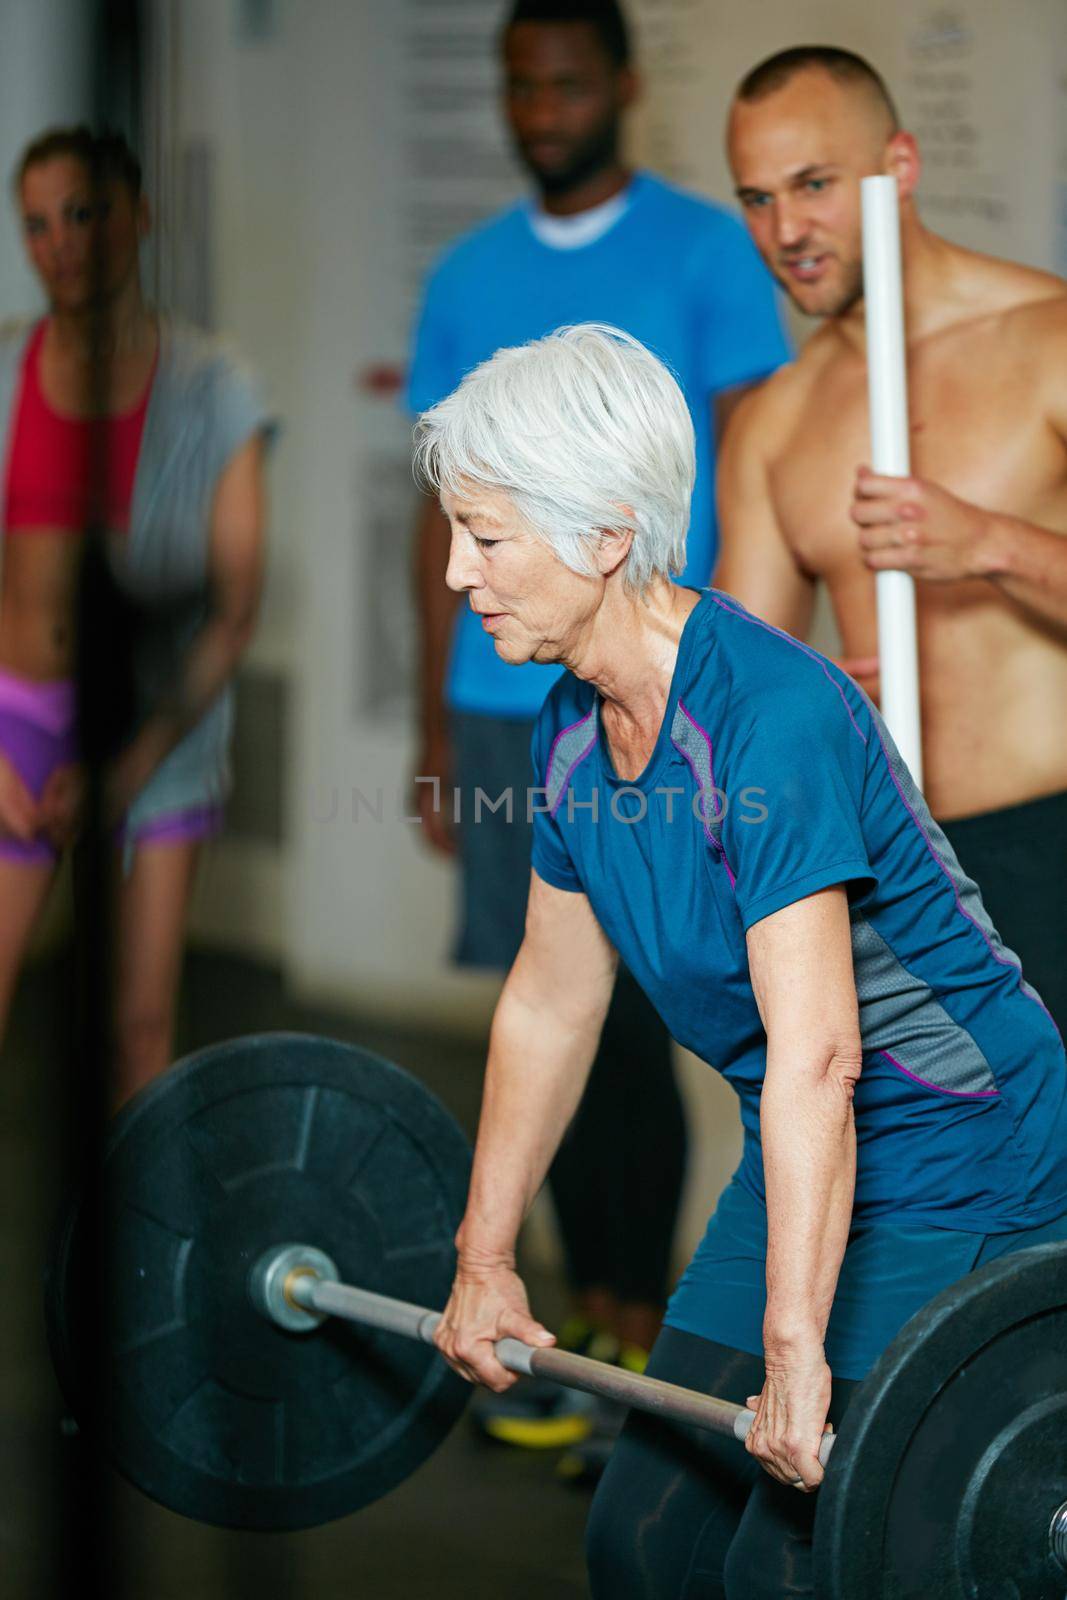 Nothing is going to happen in your comfort zone. Shot of a senior woman lifting weights while a group of people in the background watch on. by YuriArcurs